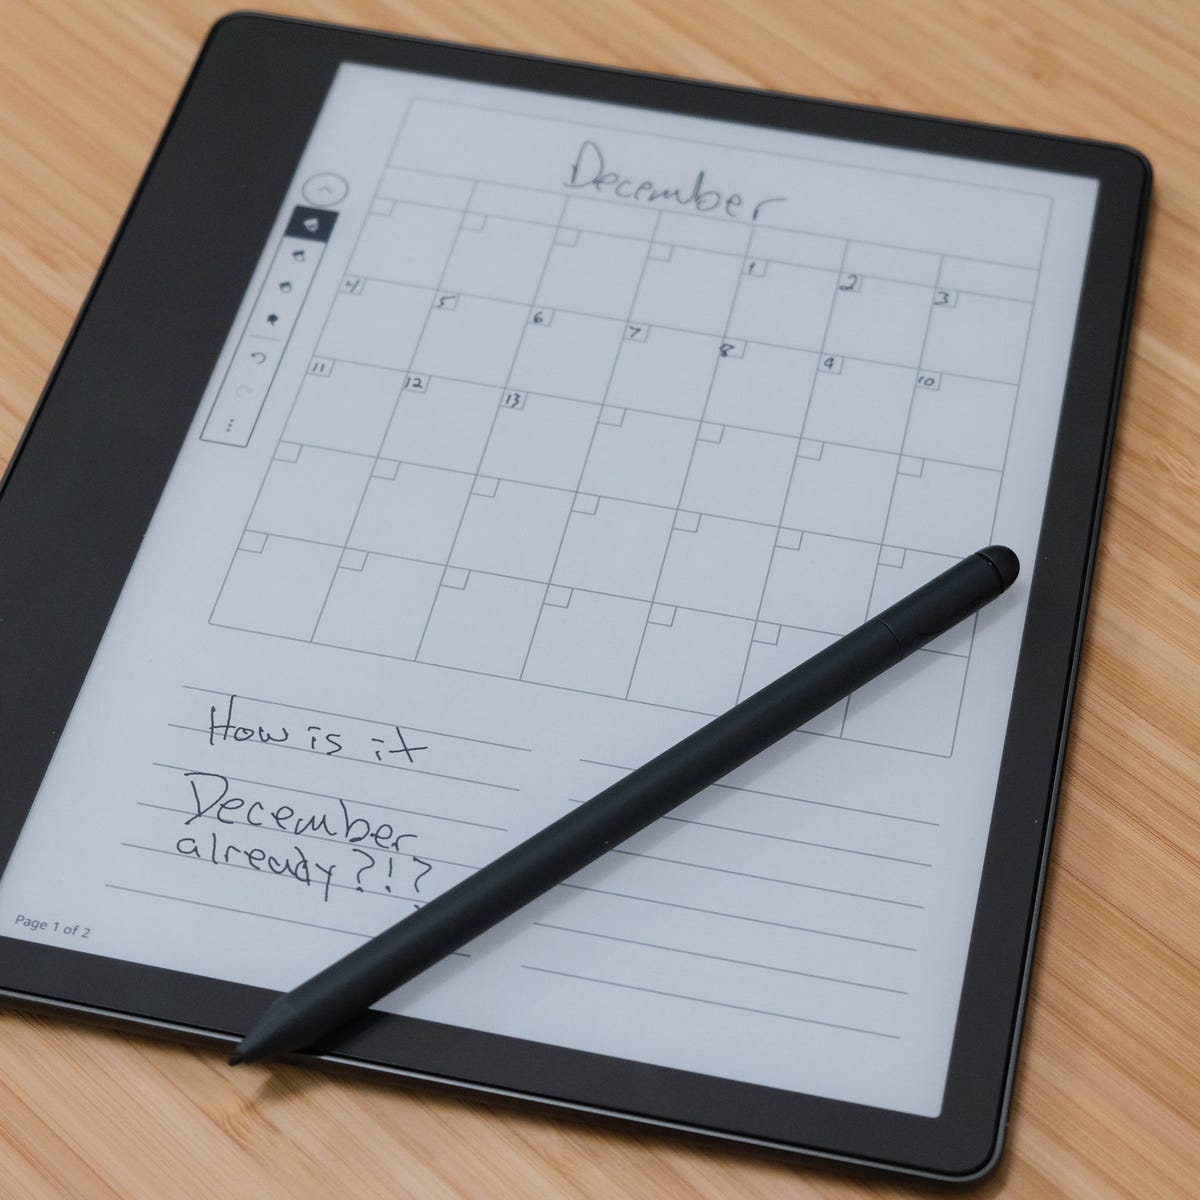 Kindle Scribe tips: 9 ways to get the most out of 's digital notebook